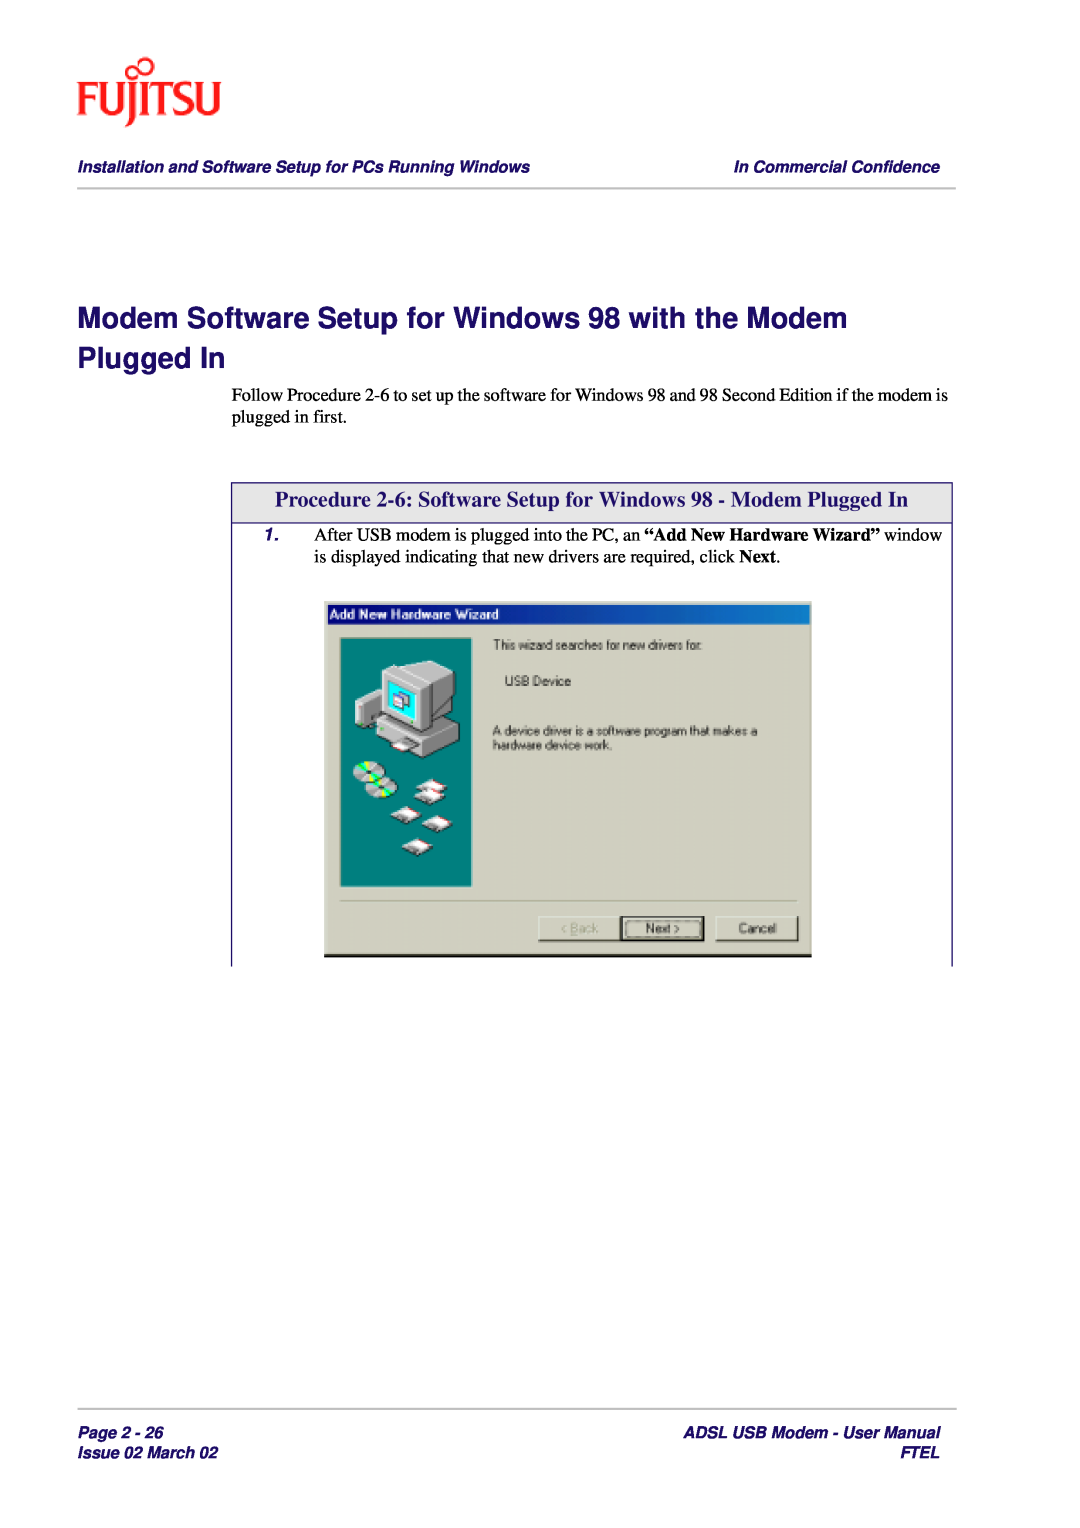 Fujitsu 3XAX-00803AAS user manual Modem Software Setup for Windows 98 with the Modem Plugged In 